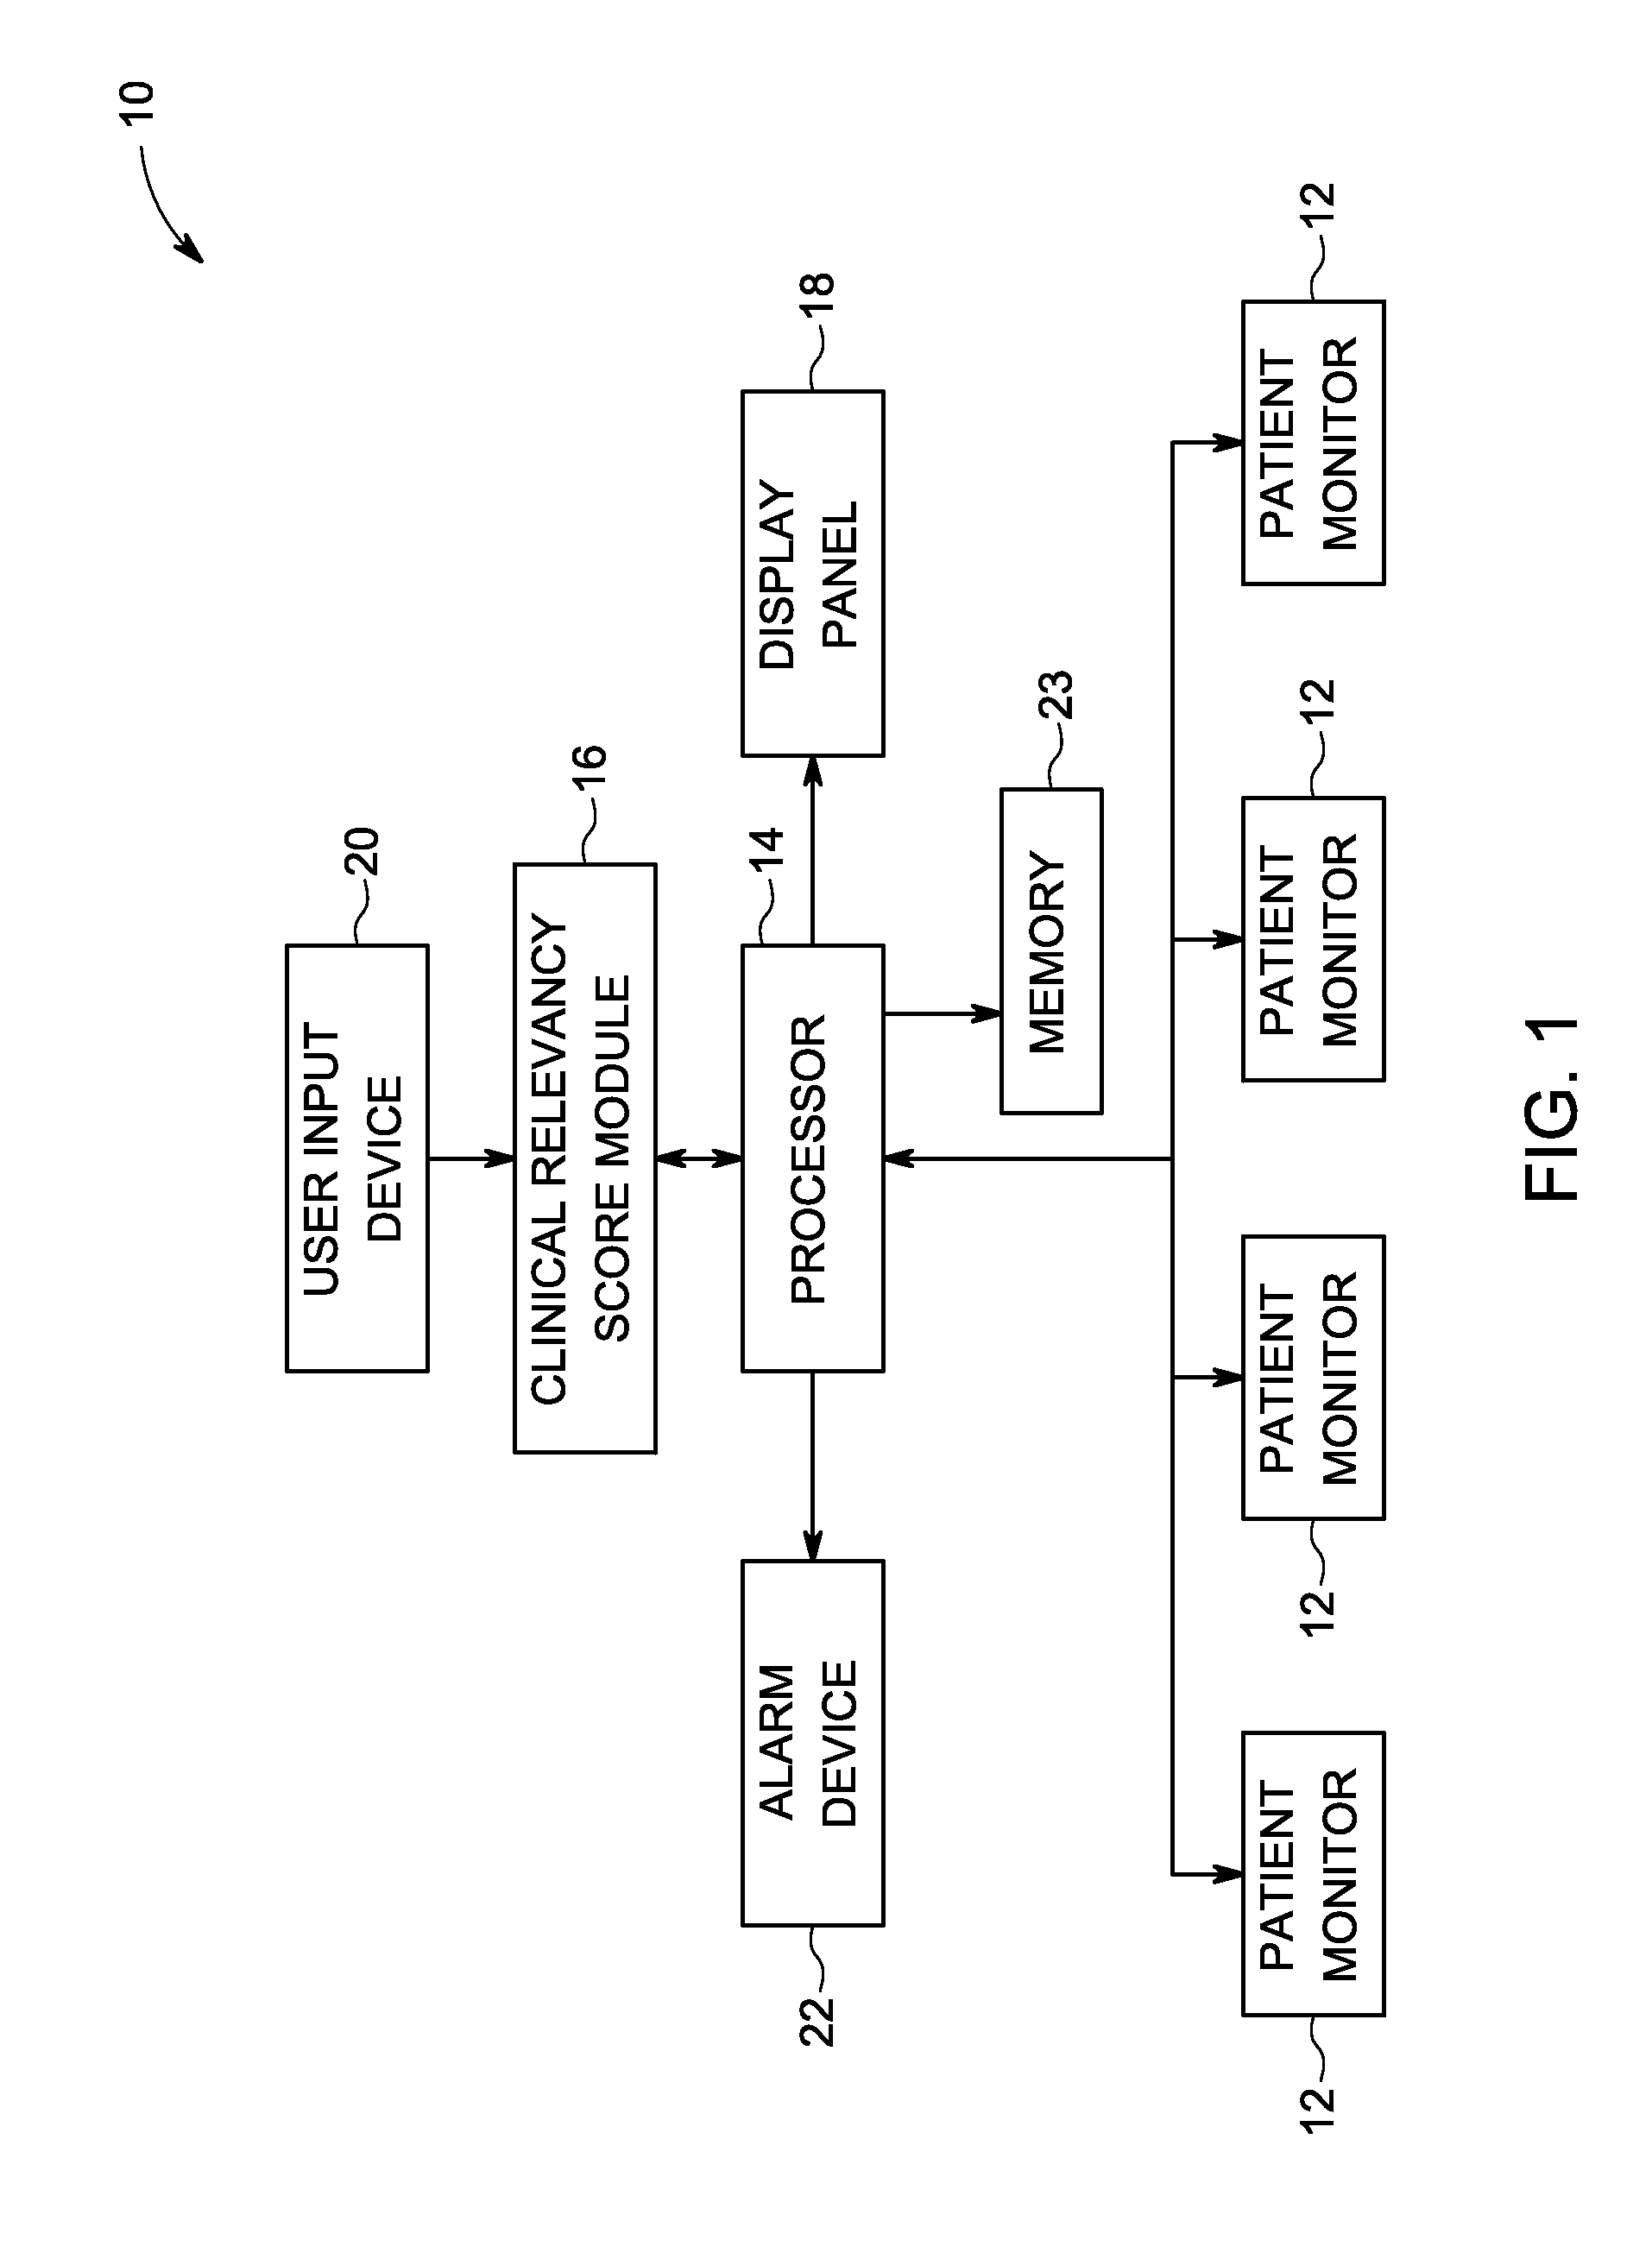 Method and system for determining the clinical relevancy of alarm events